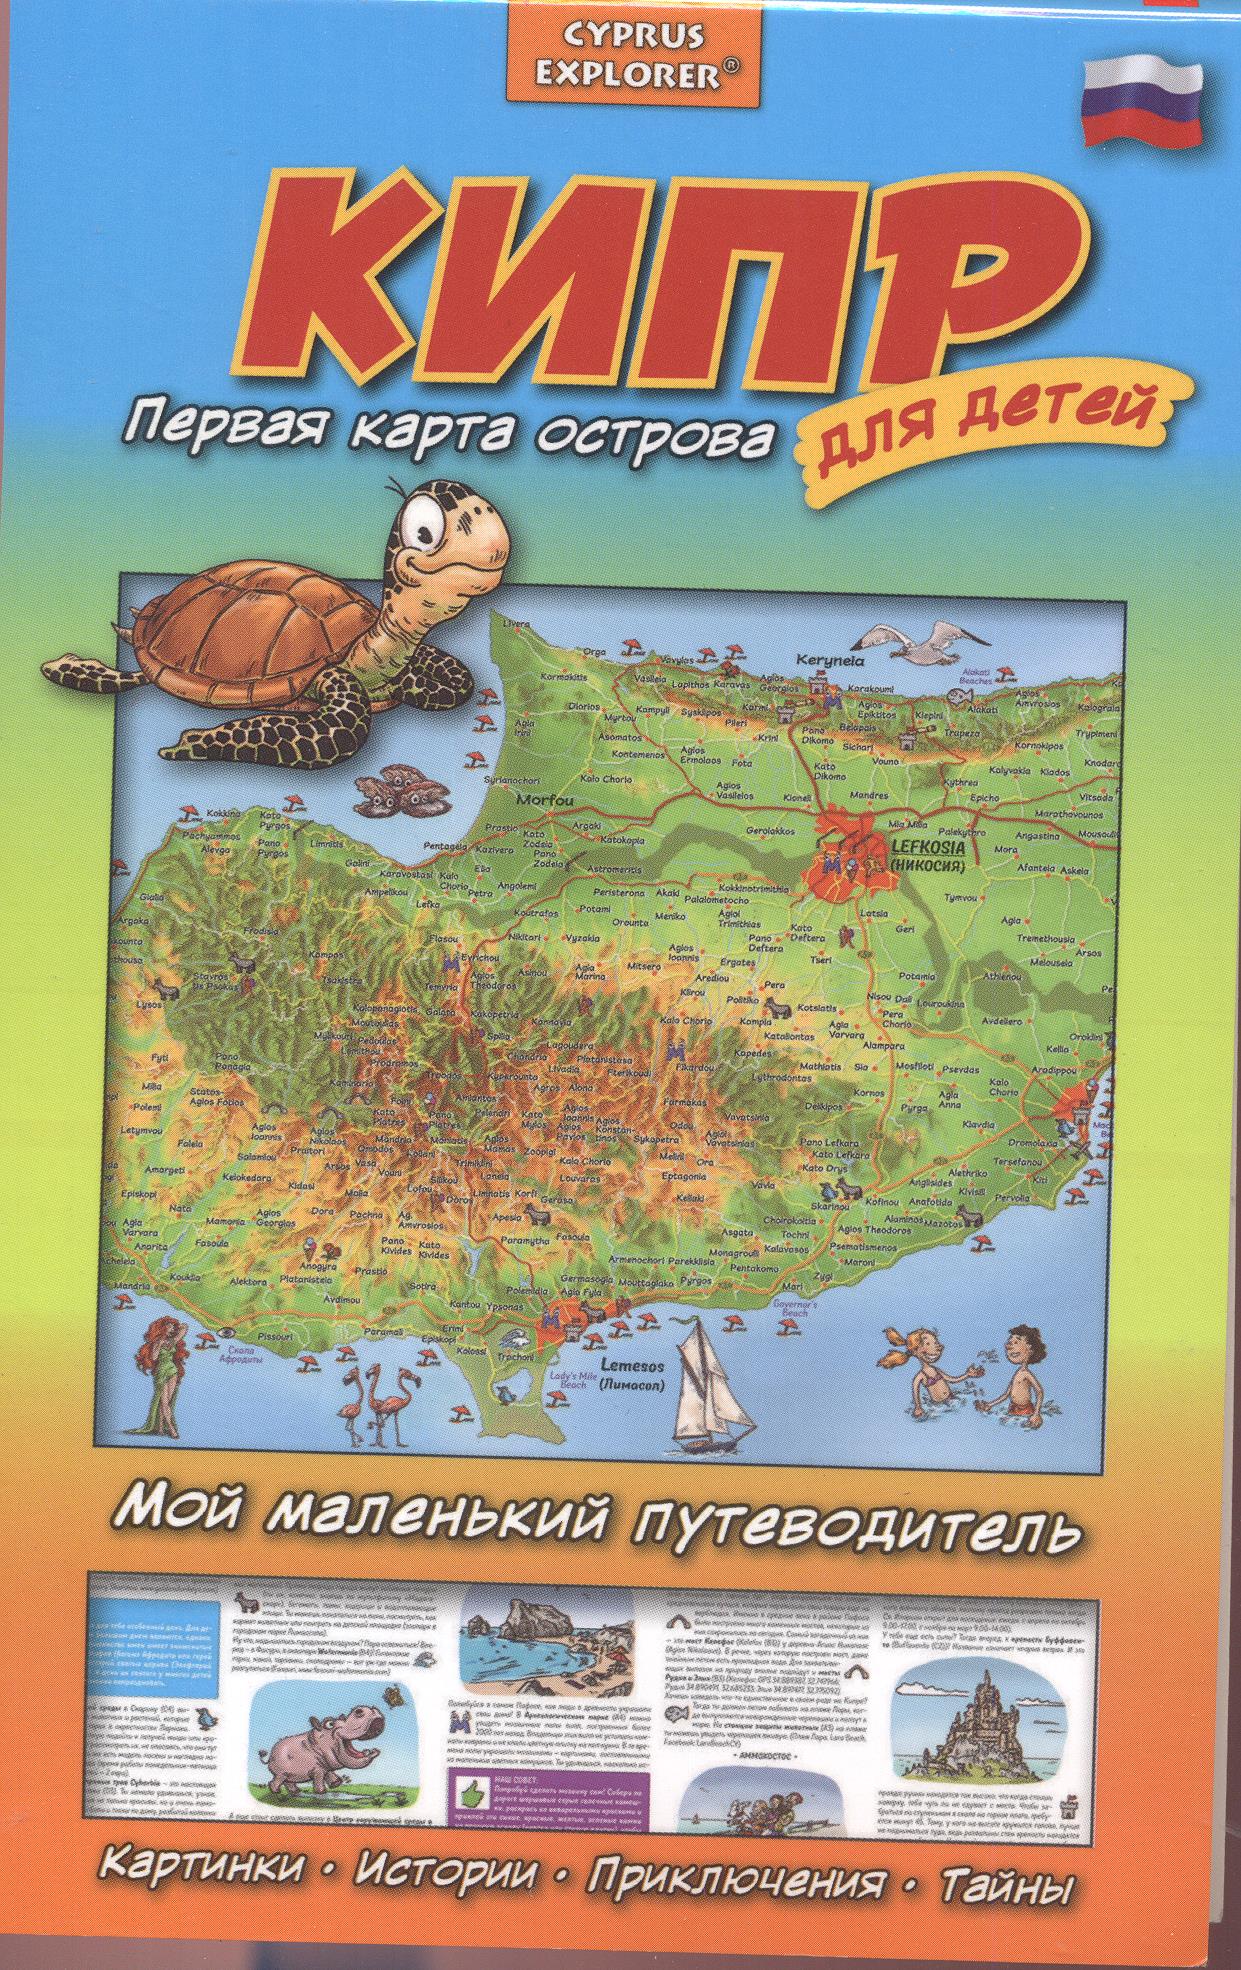 Cyprus, the island's first map for kids